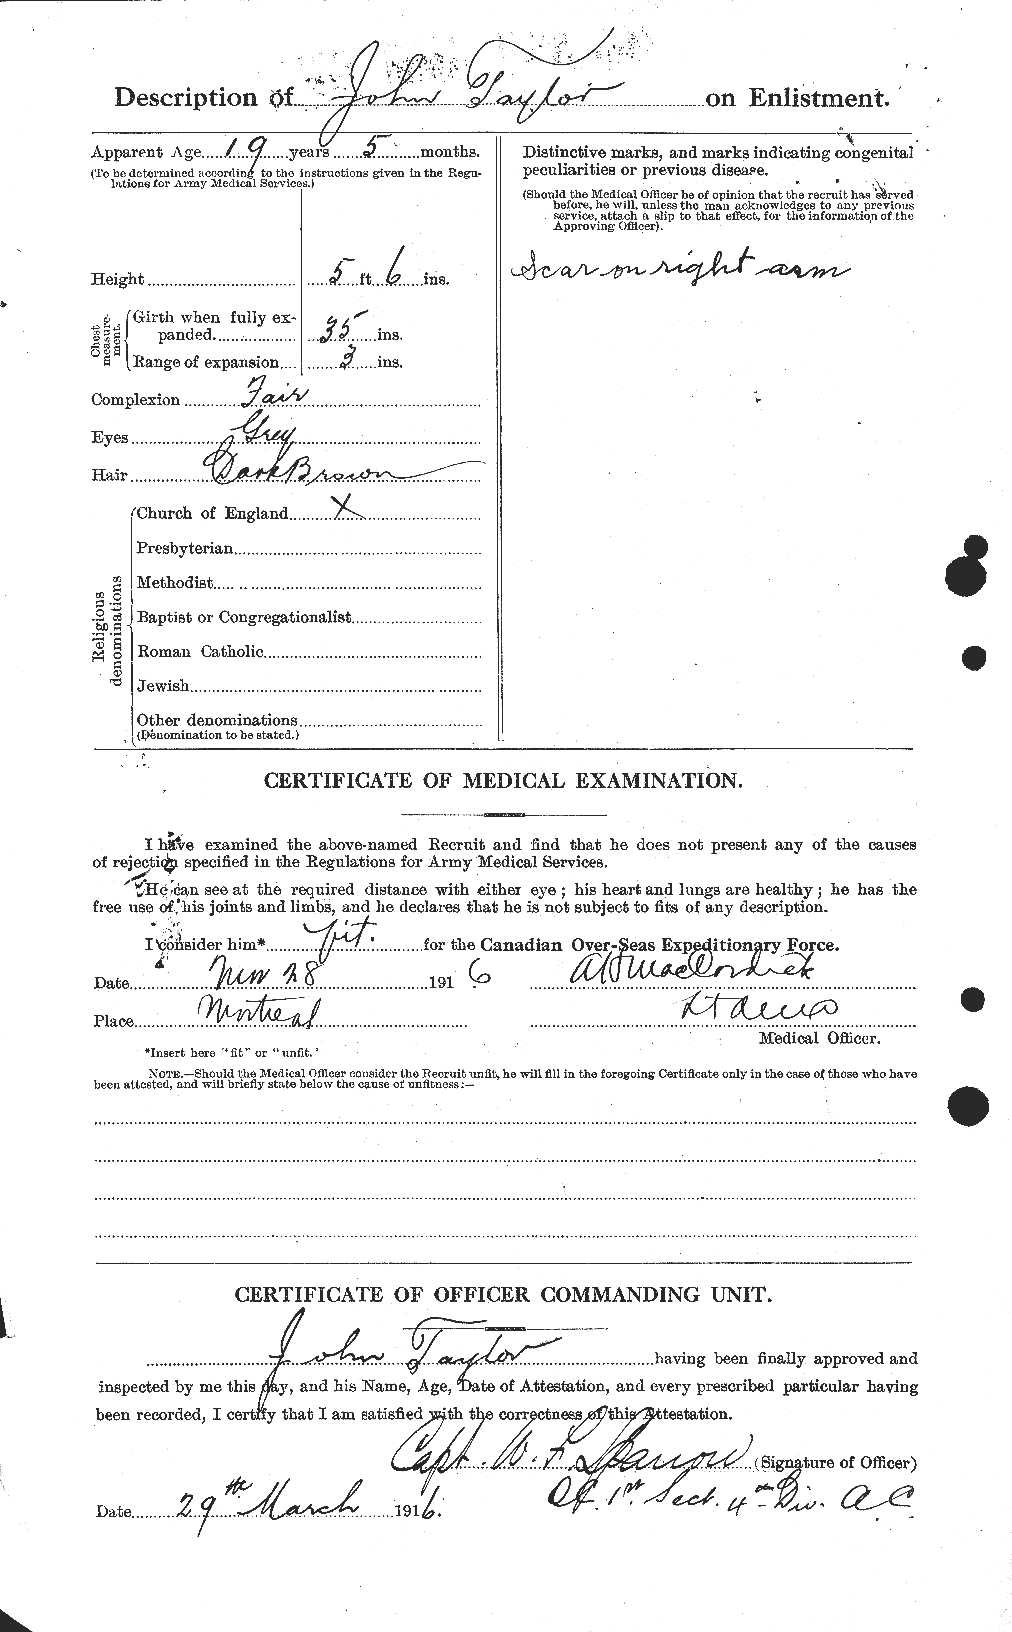 Personnel Records of the First World War - CEF 627014b